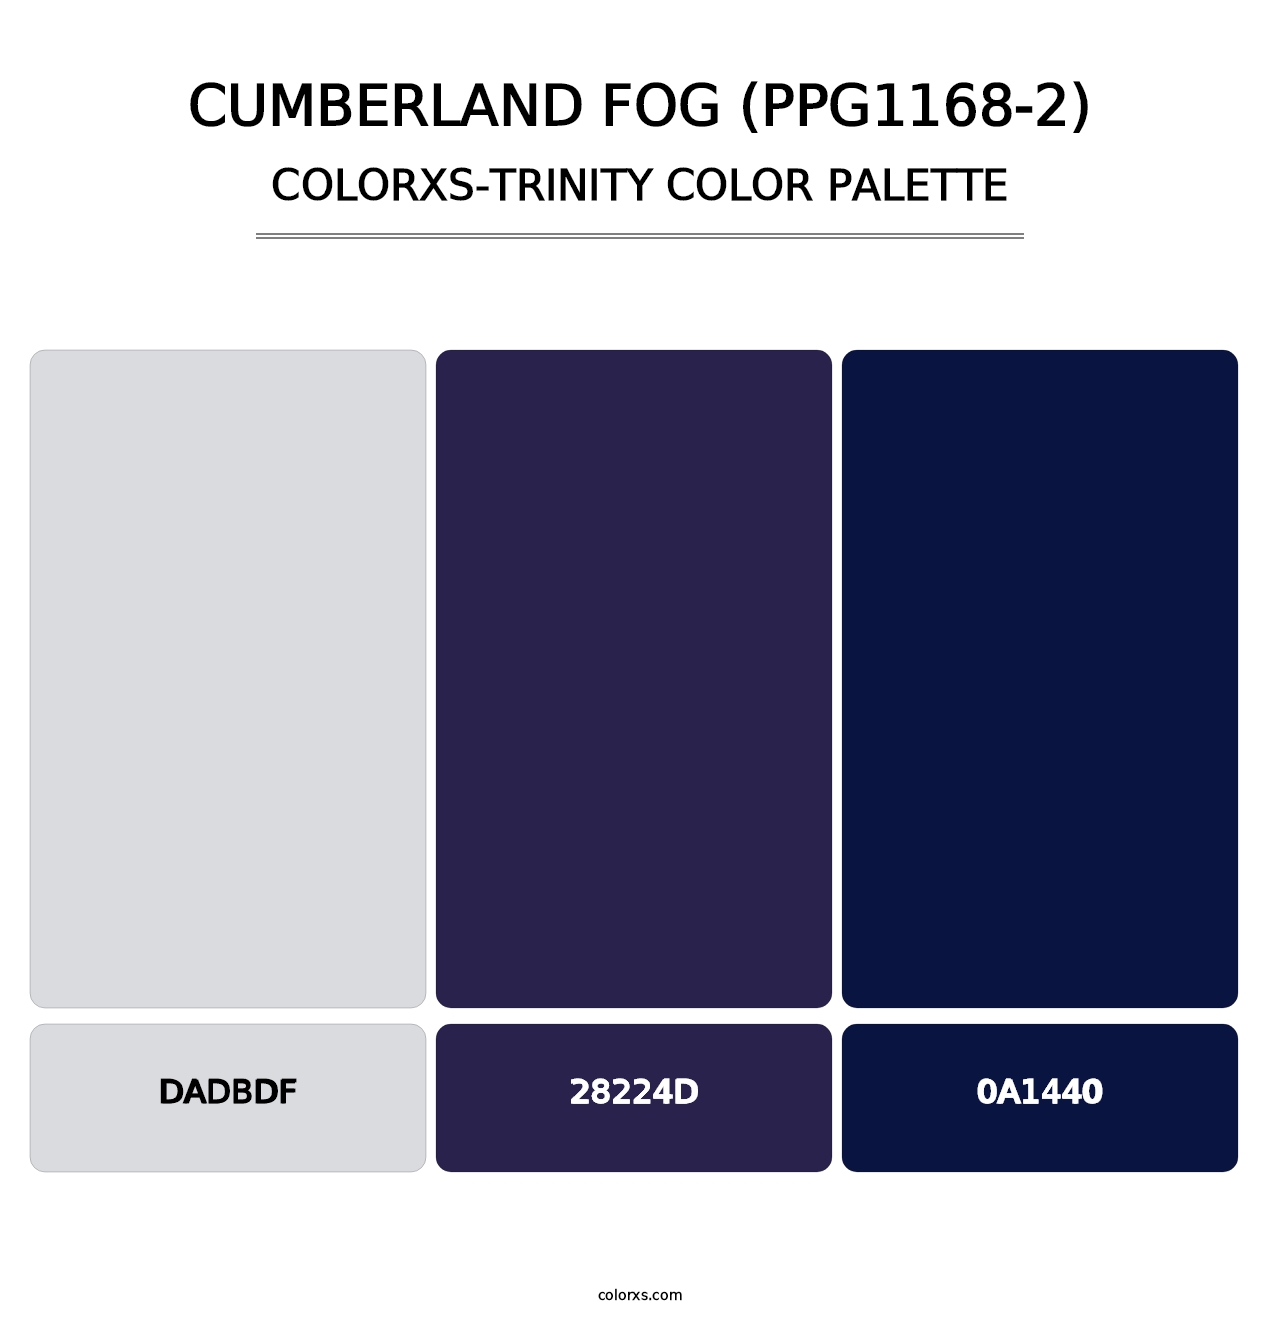 Cumberland Fog (PPG1168-2) - Colorxs Trinity Palette